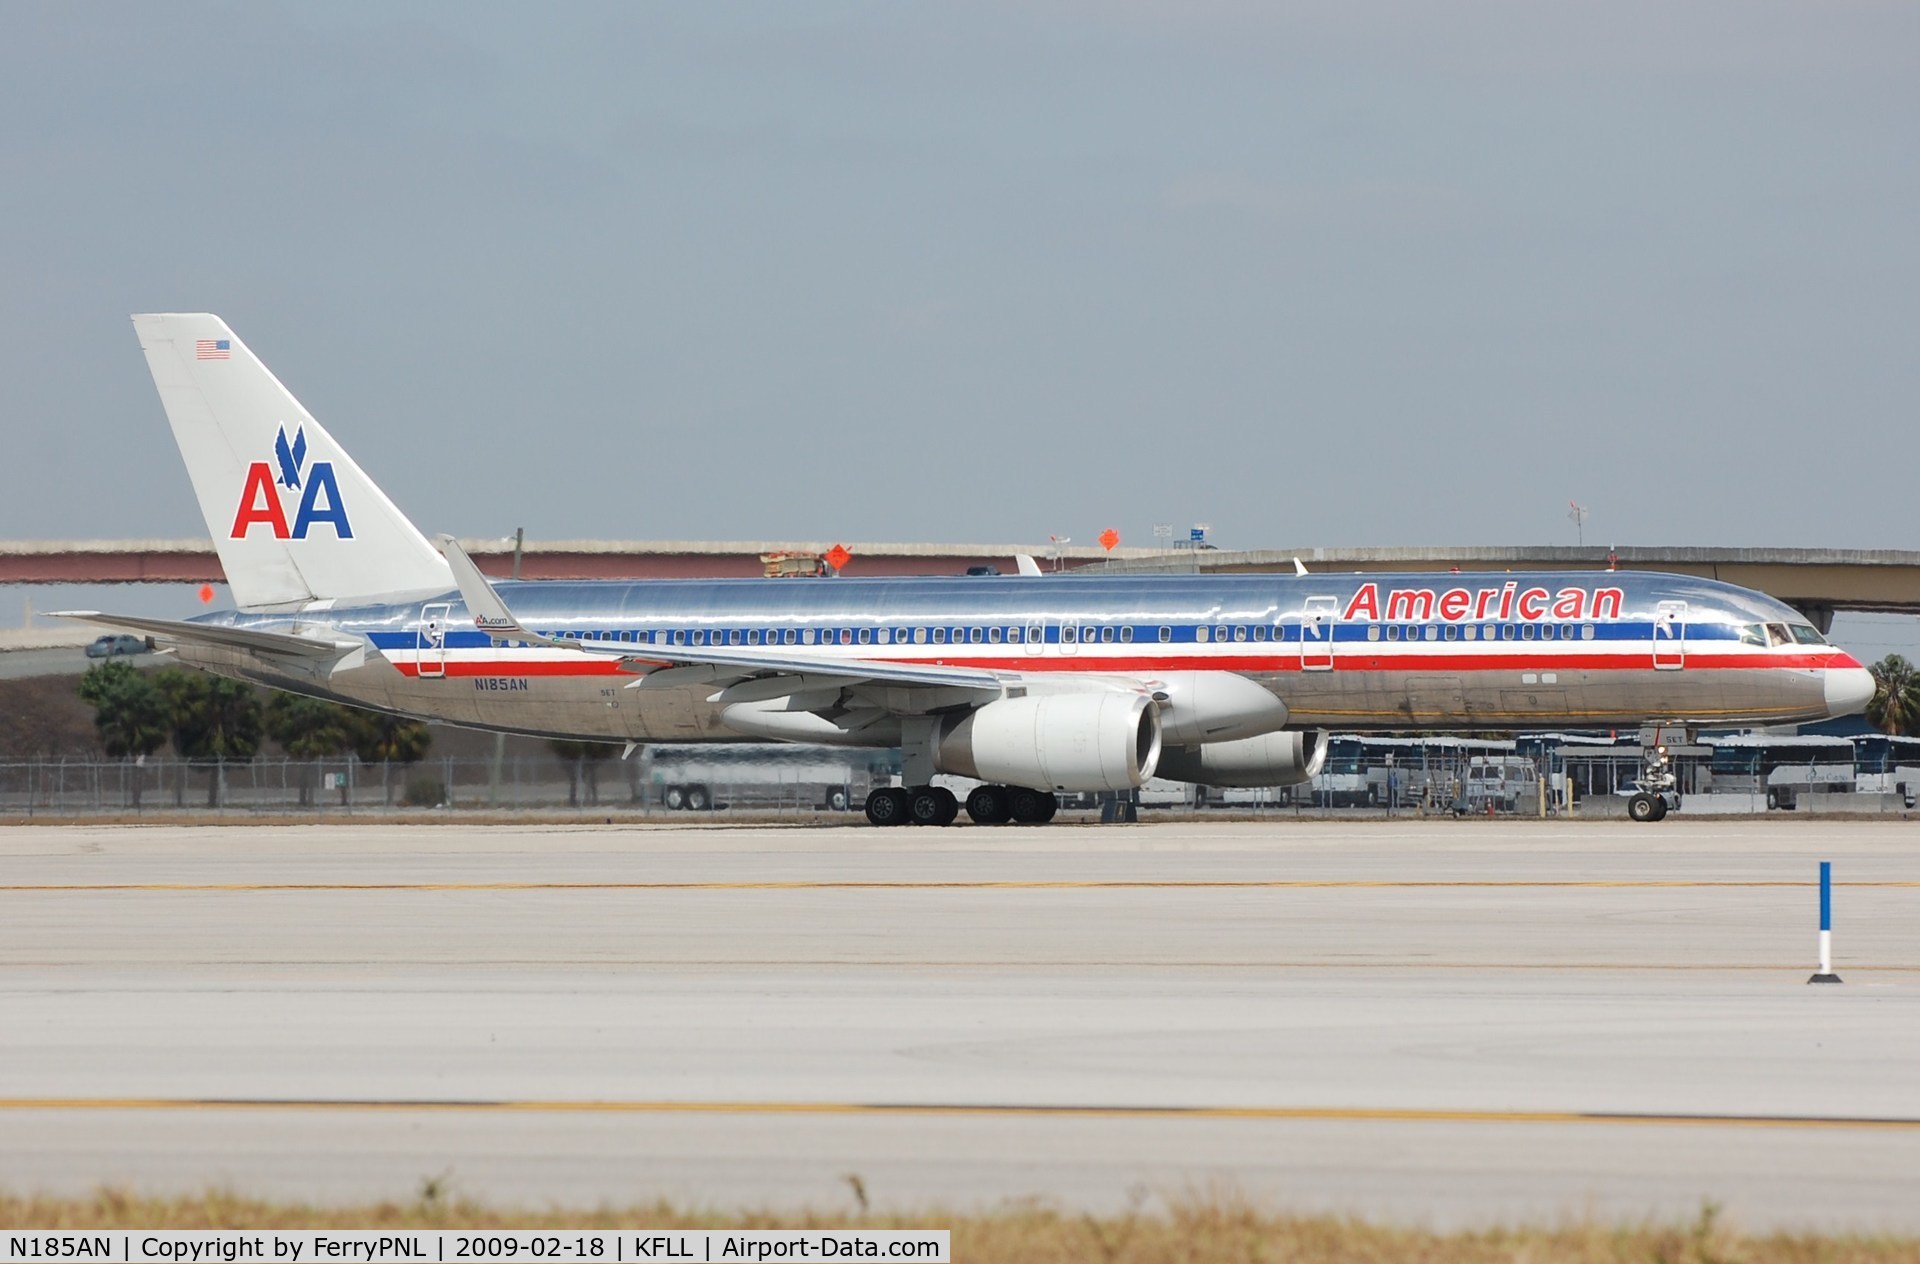 N185AN, 2001 Boeing 757-223 C/N 32379, AA B752 about to take off from FLL